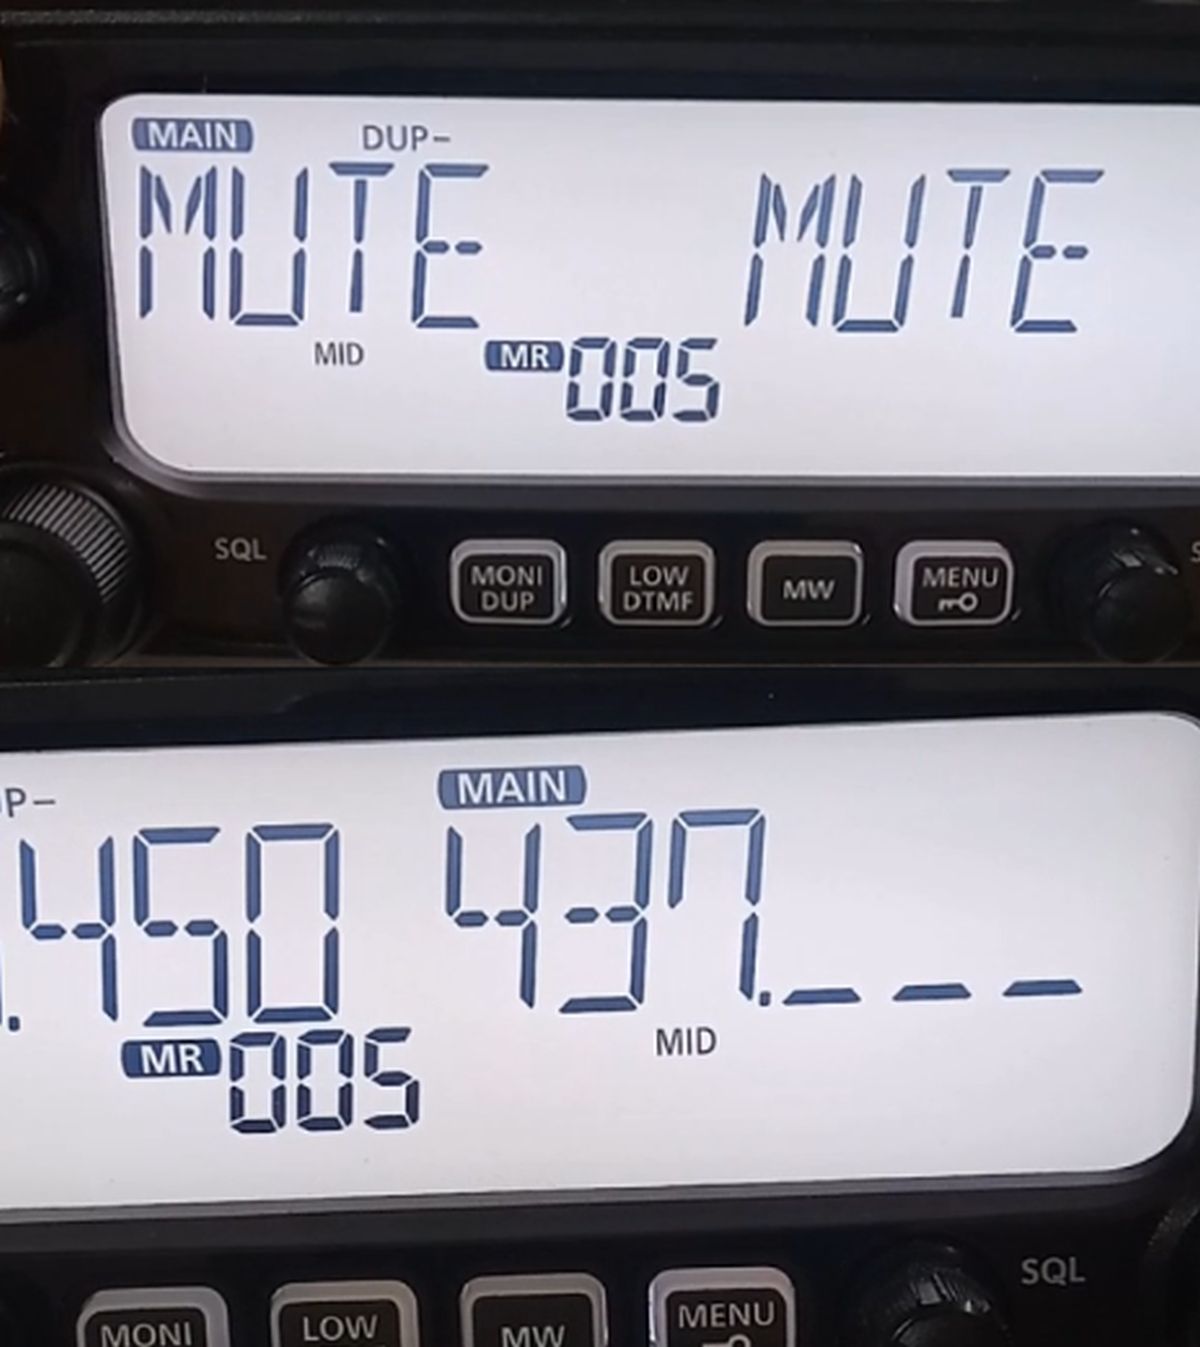 Muting VFOs and changing tuning step to MHz in ICOM 2730